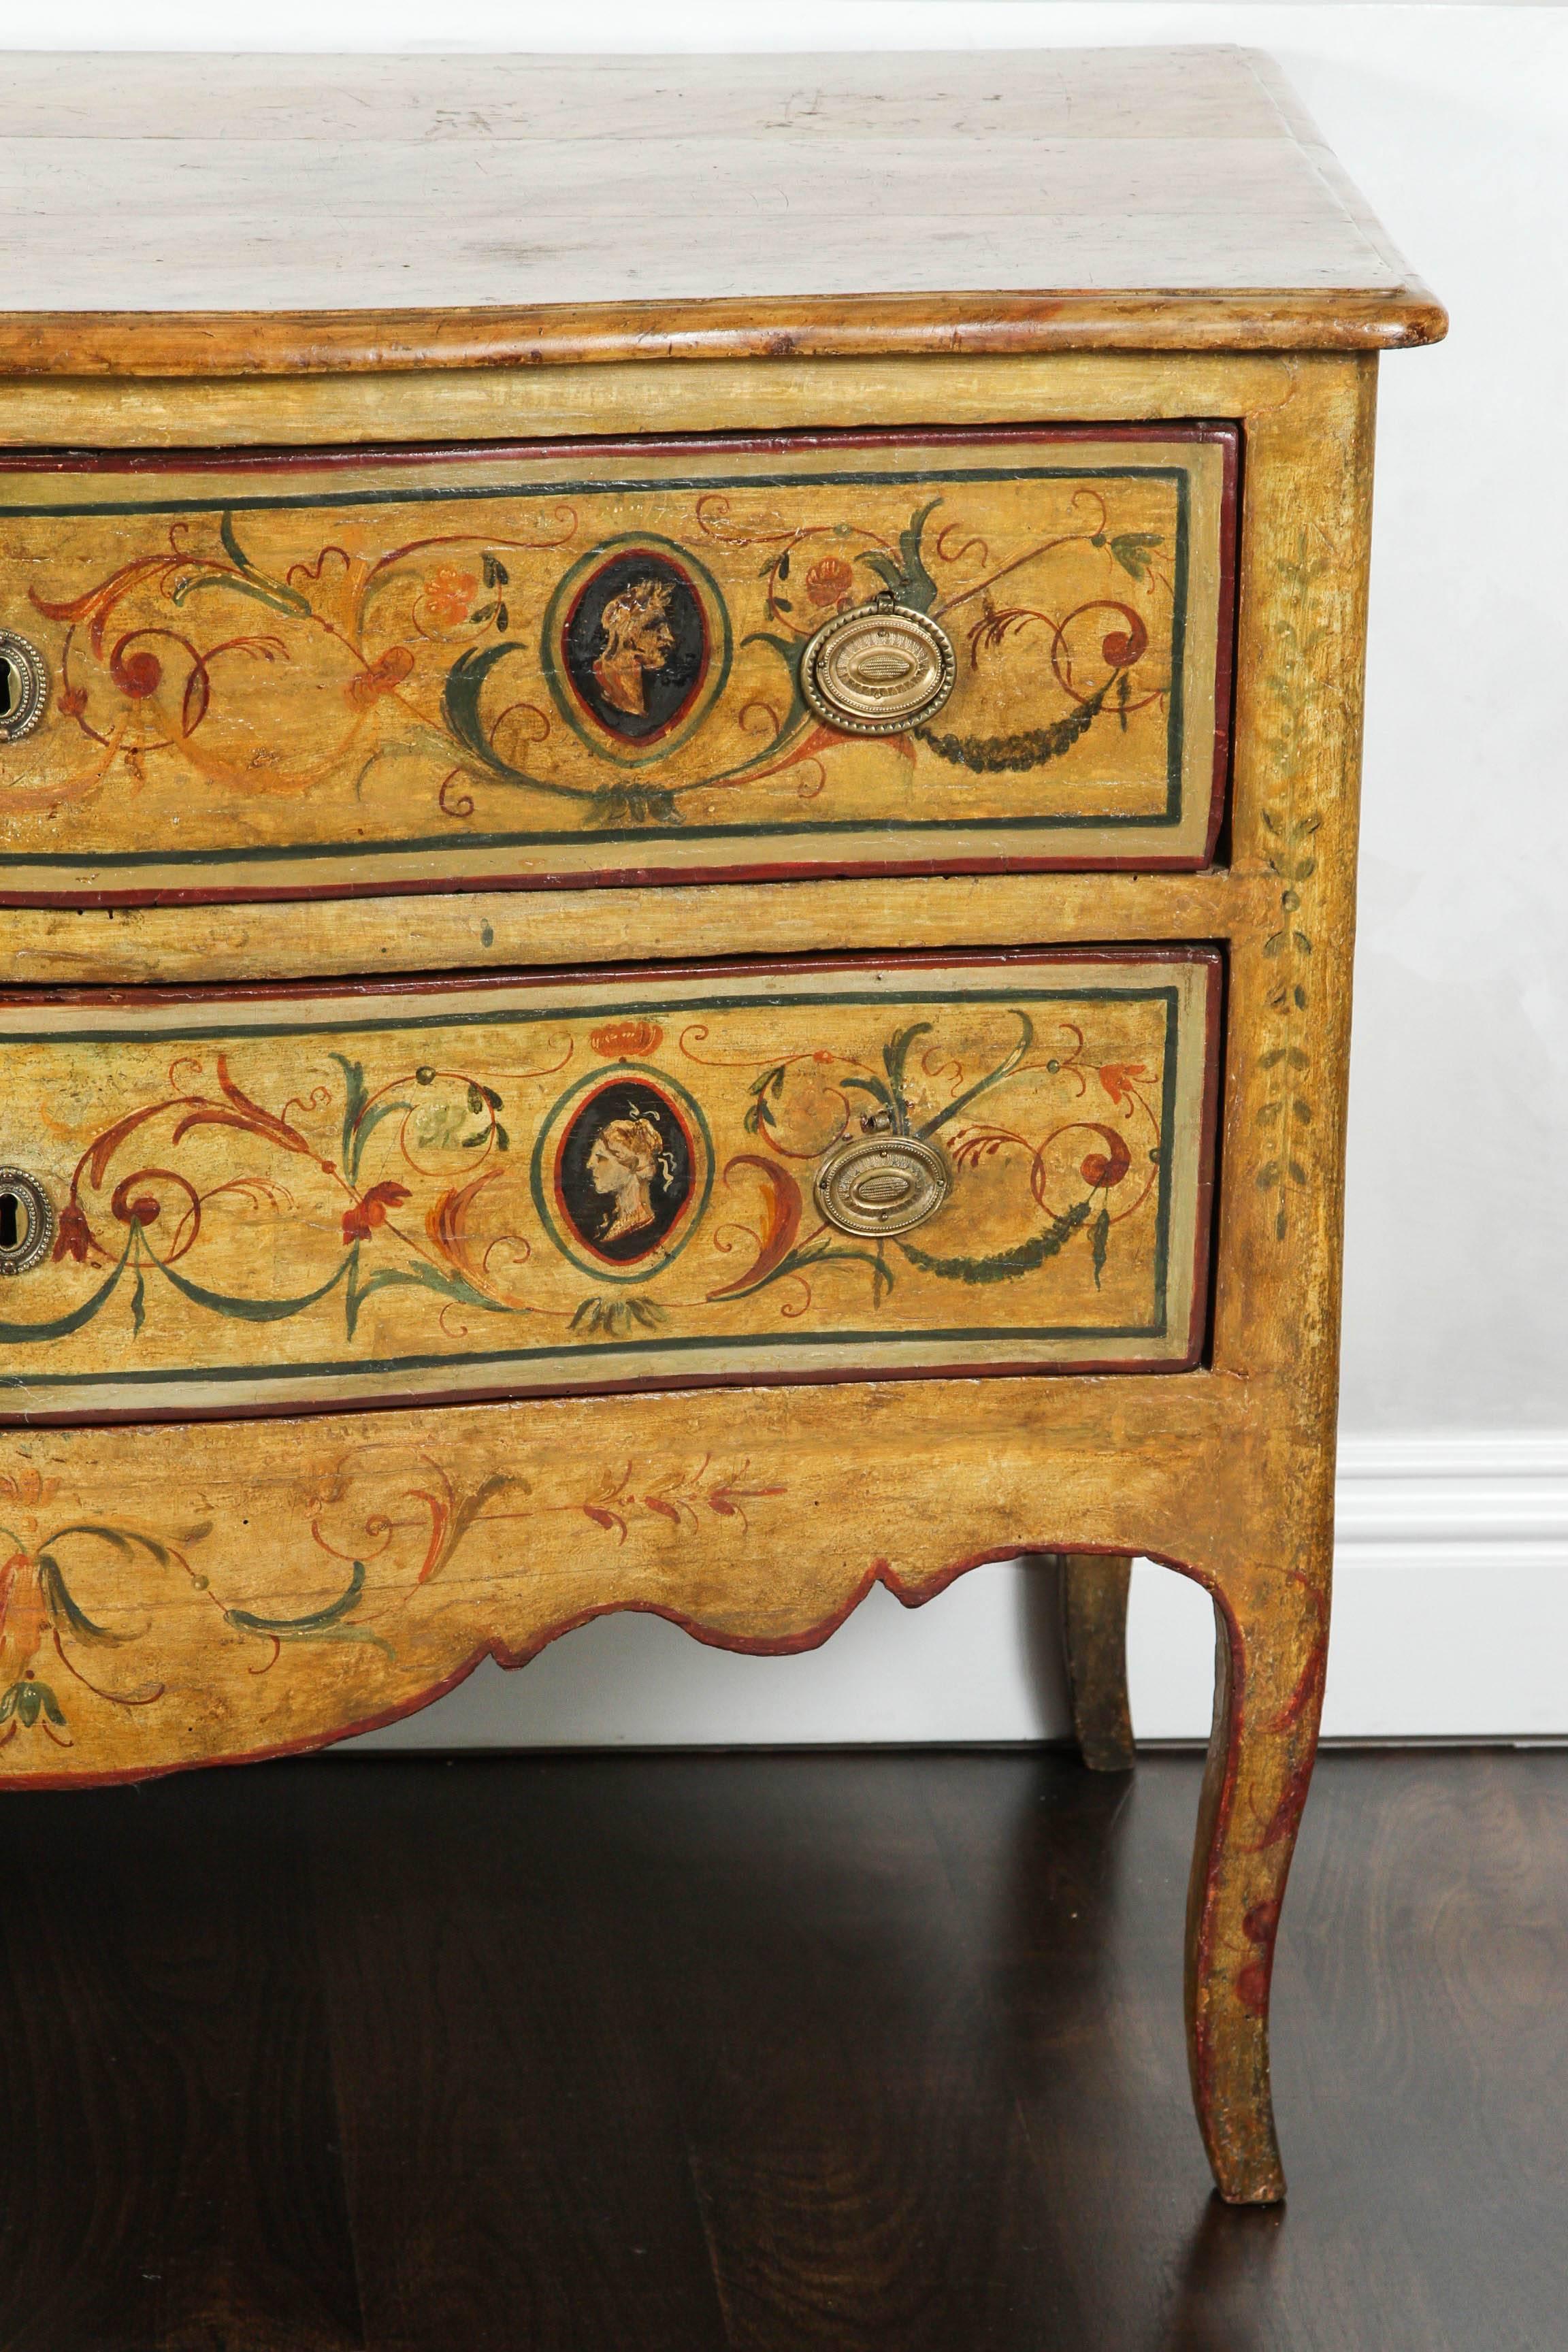 Early 19th to late 18th century. Italian Two-Drawer commode with faux hand-painted top. Profile portrait motif with colorful details.